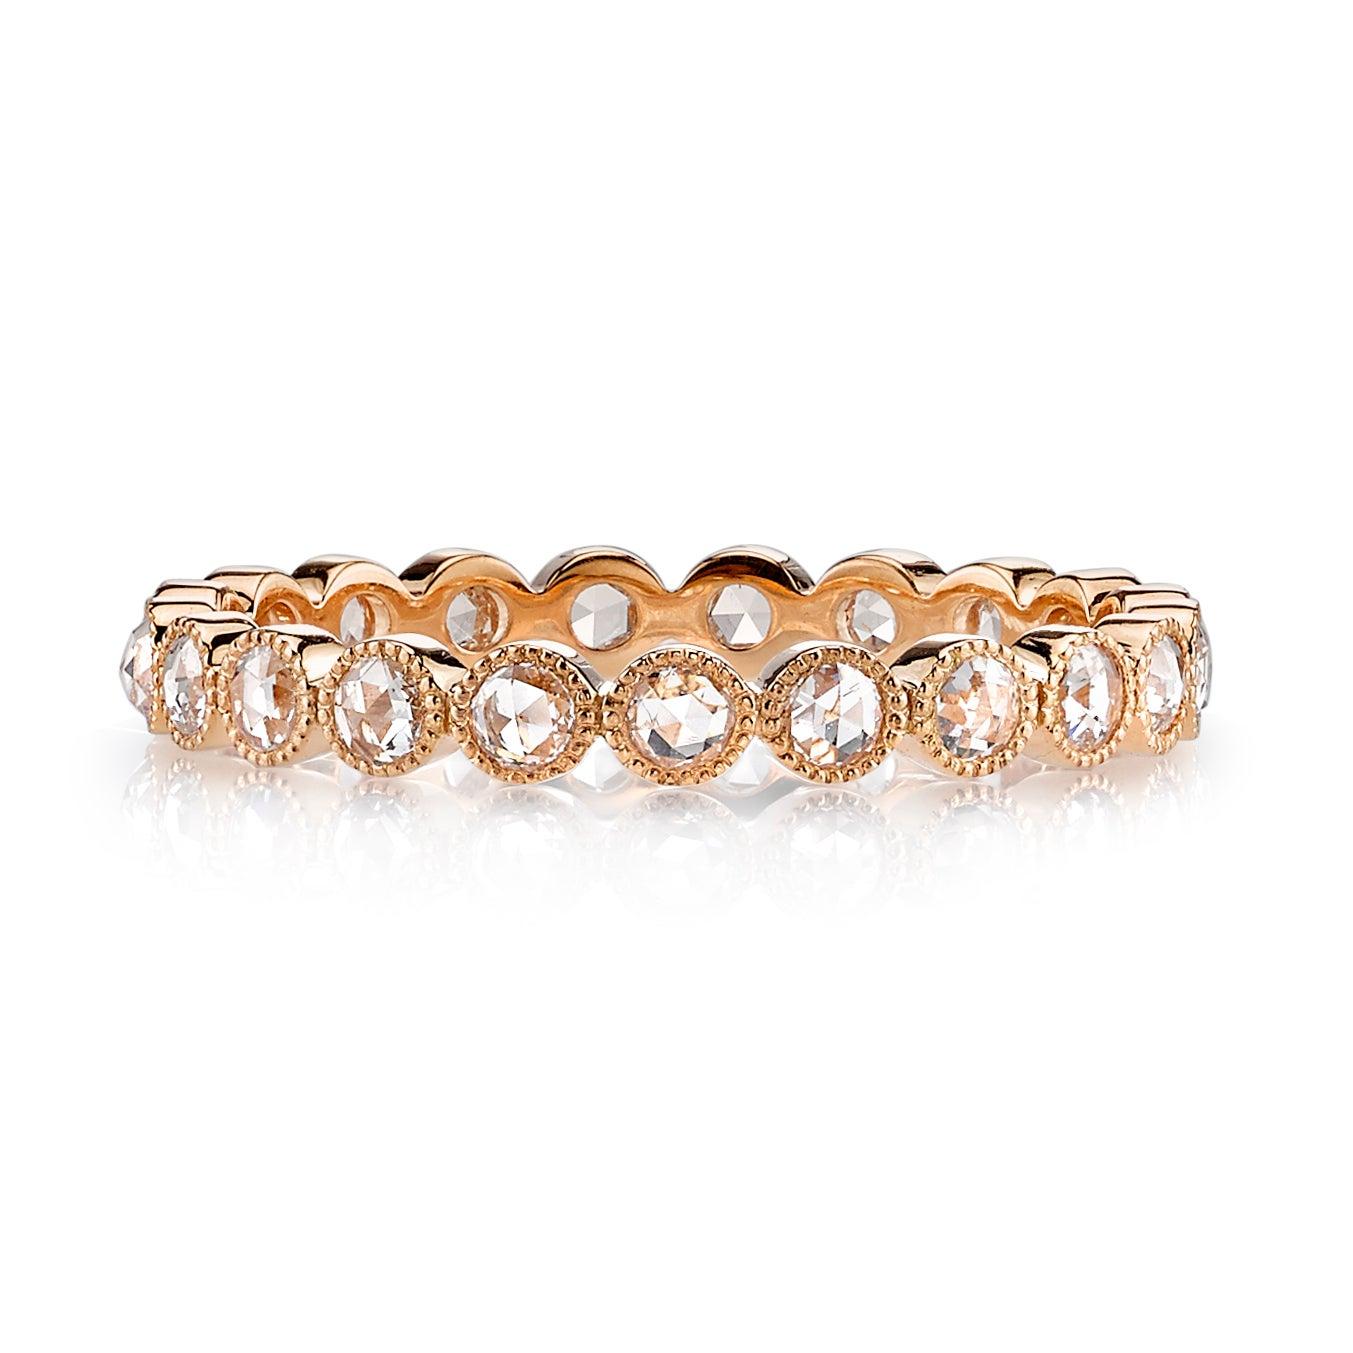 For Sale:  Handcrafted Gabby Rose Cut Diamond Eternity Band by Single Stone 4